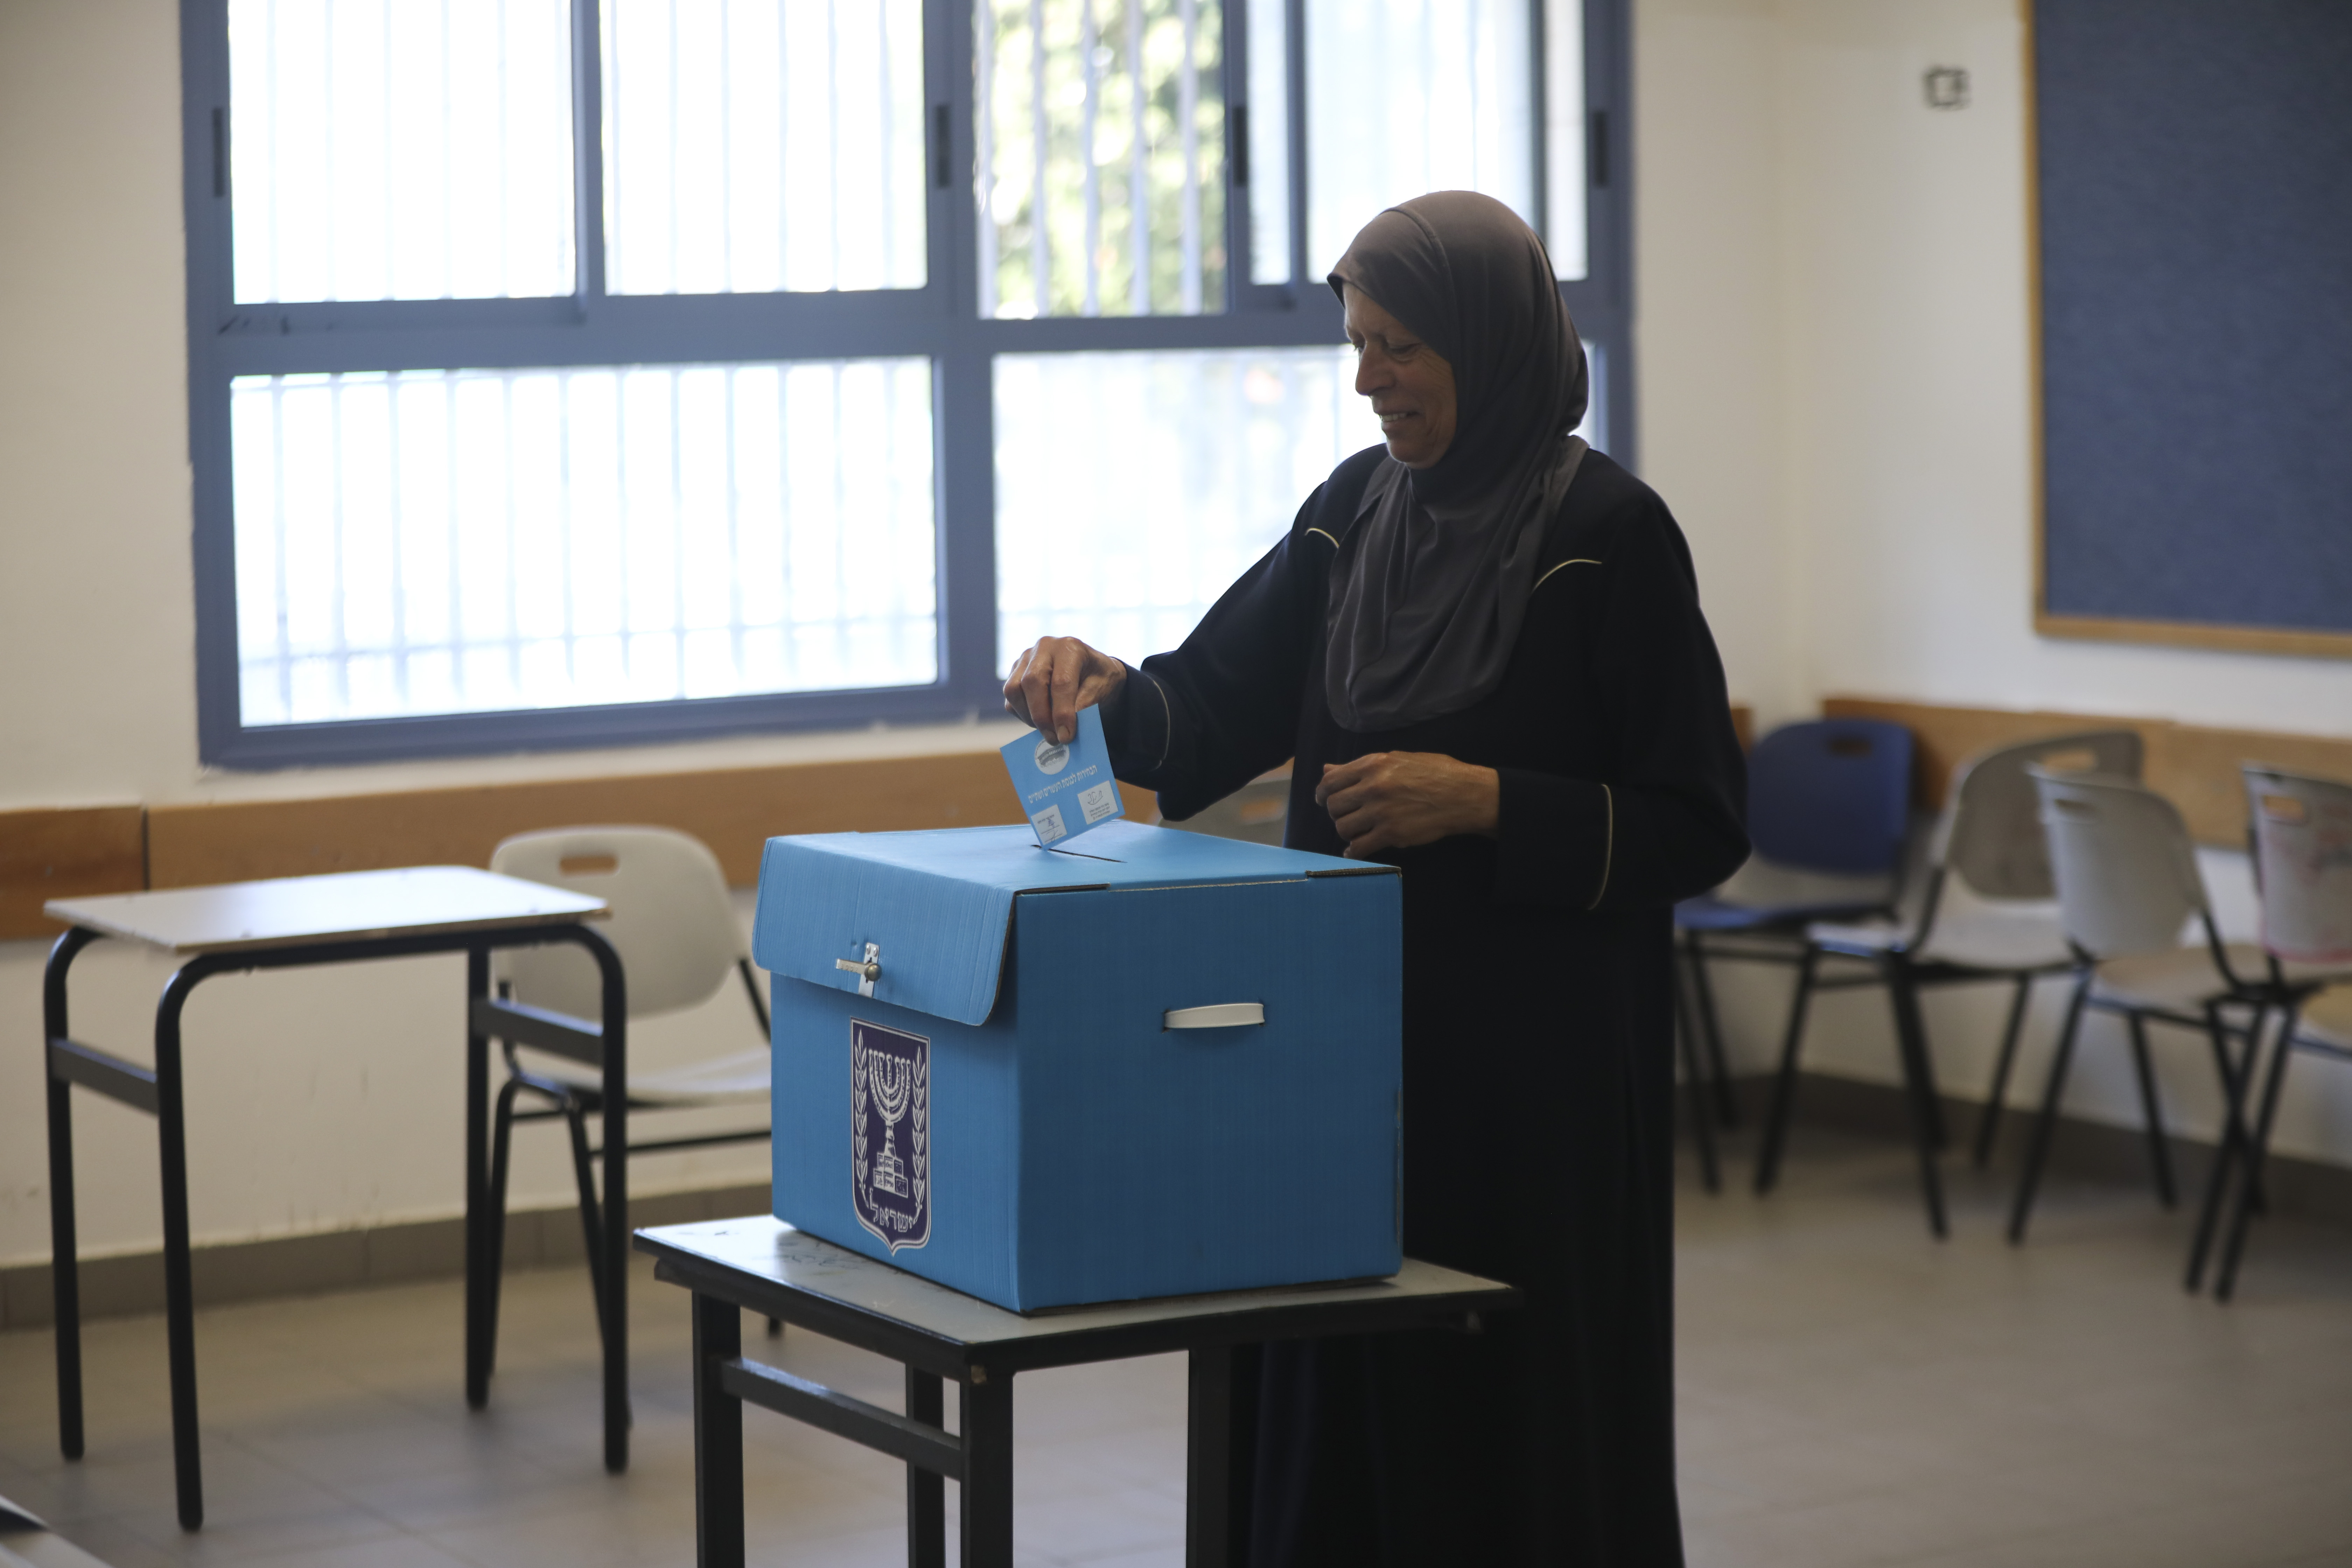 A woman votes in Jerusalem Tuesday, Sept. 17, 2019. Israelis began voting Tuesday in an unprecedented repeat election that will decide whether longtime Prime Minister Benjamin Netanyahu stays in power despite a looming indictment on corruption charges. (AP Photo/Mahmoud Illean)